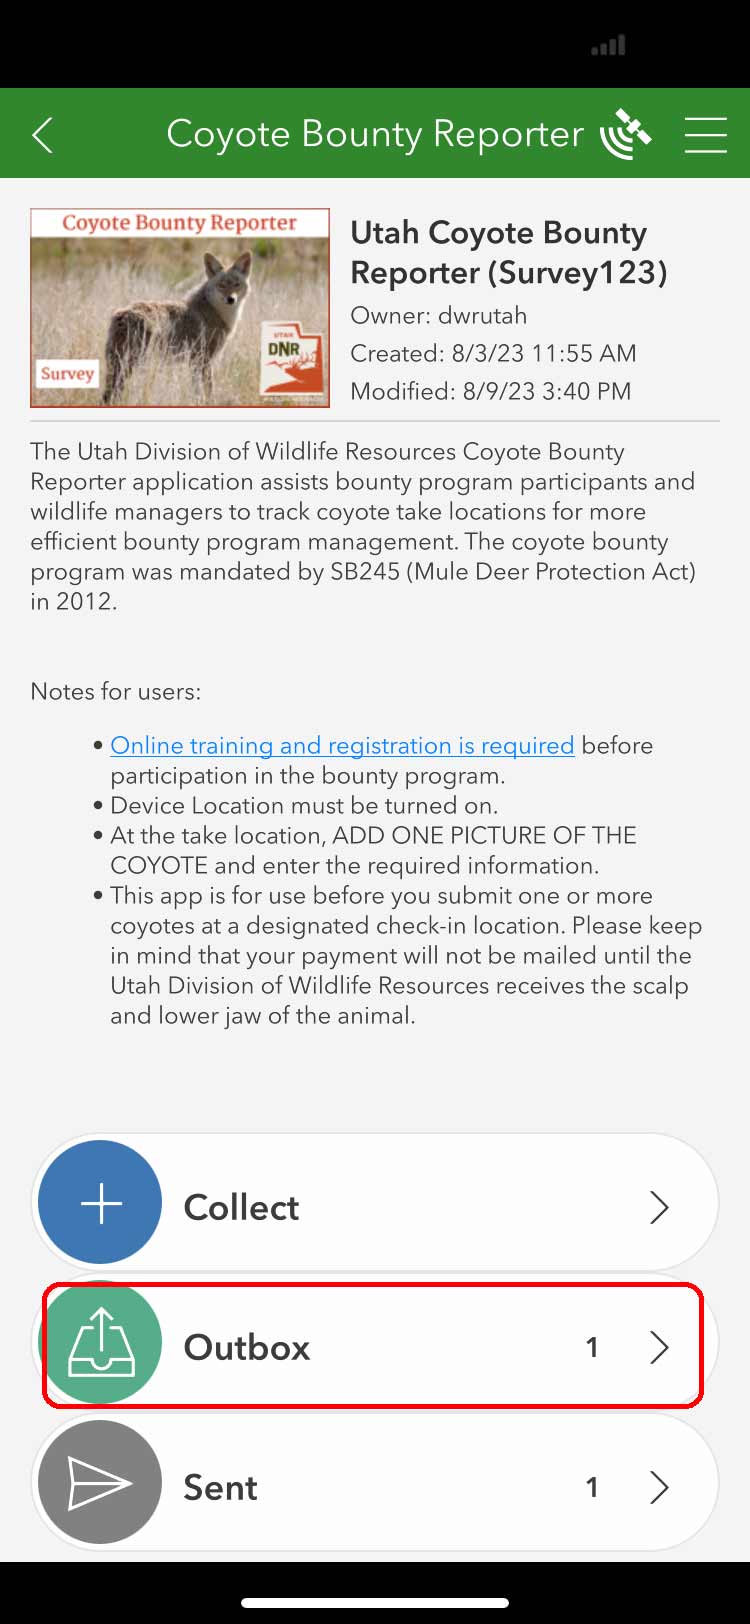 iOS screen shot of the Utah Coyote Bounty Reporter survey, outbox